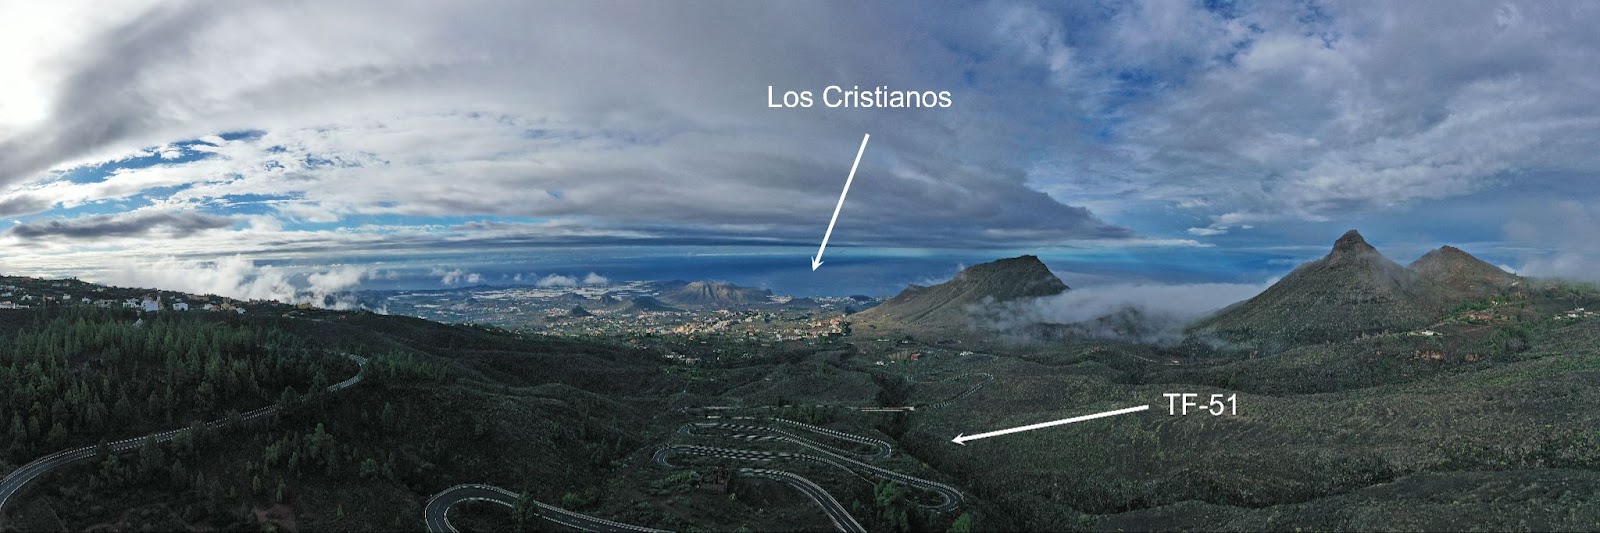 panoramic view of the Mt. Teide from Los Cristianos climb